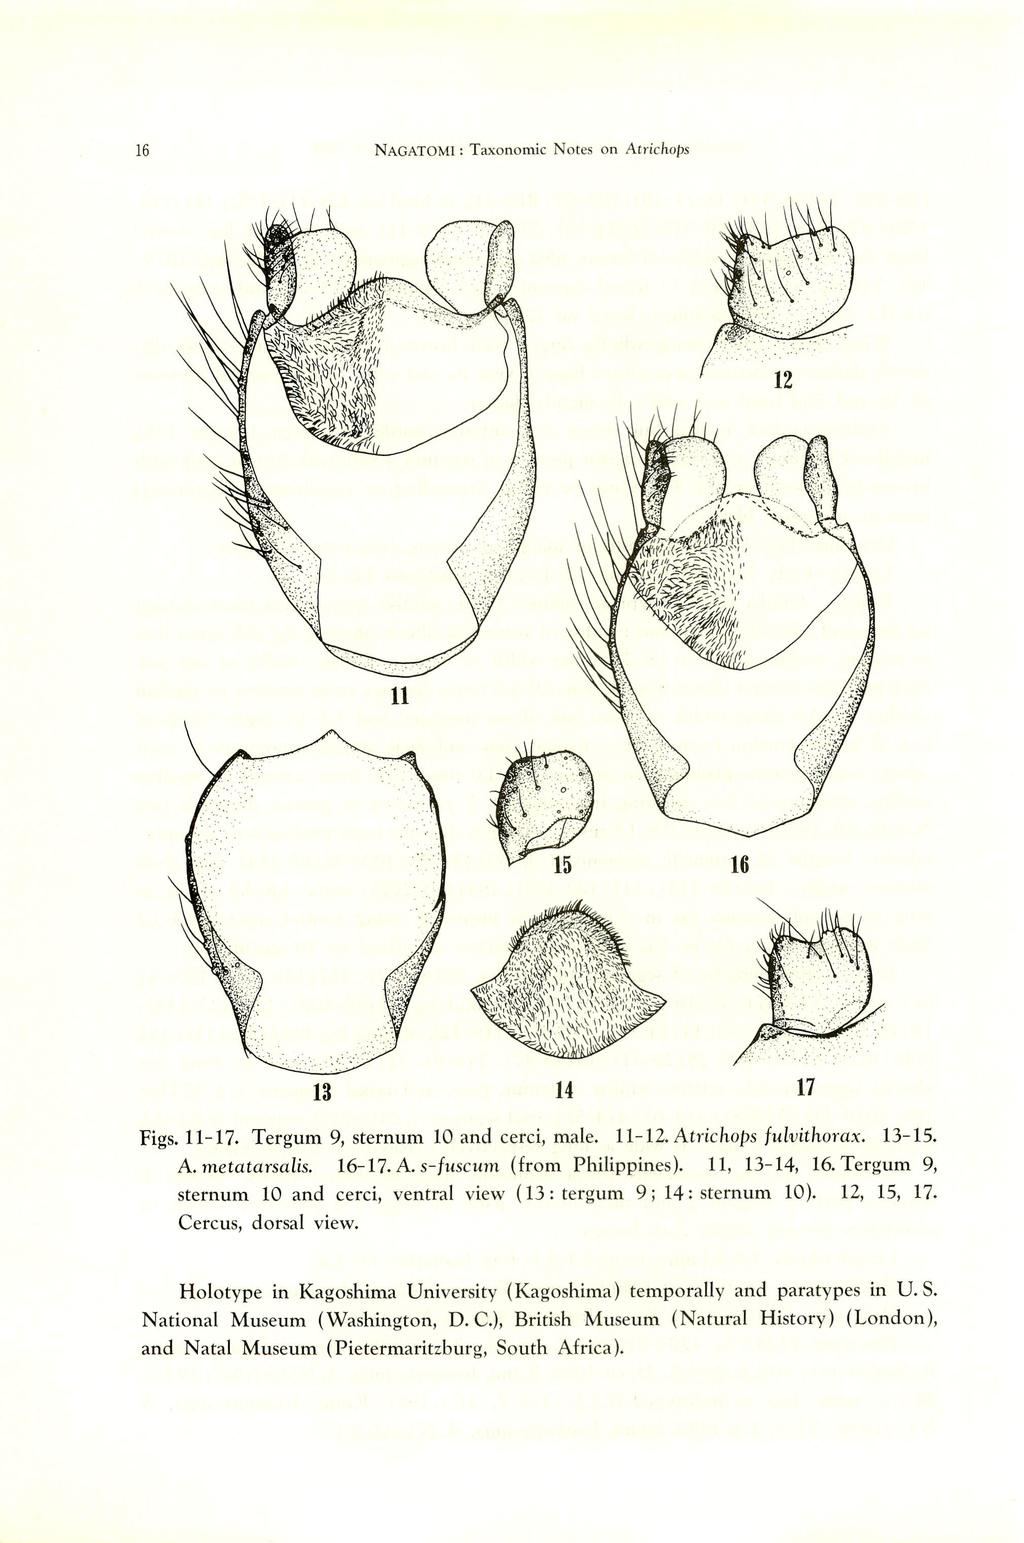 16 NAGATOMI: Taxonomic Notes on Atrichops Figs. 11-17. Tergum 9, sternum 10 and cerci, male. 11-12. Atrichops fulvithorax. 13-15. A. metatarsalis. 16-17. A. s-fuscum (from Philippines). 11, 13-14, 16.